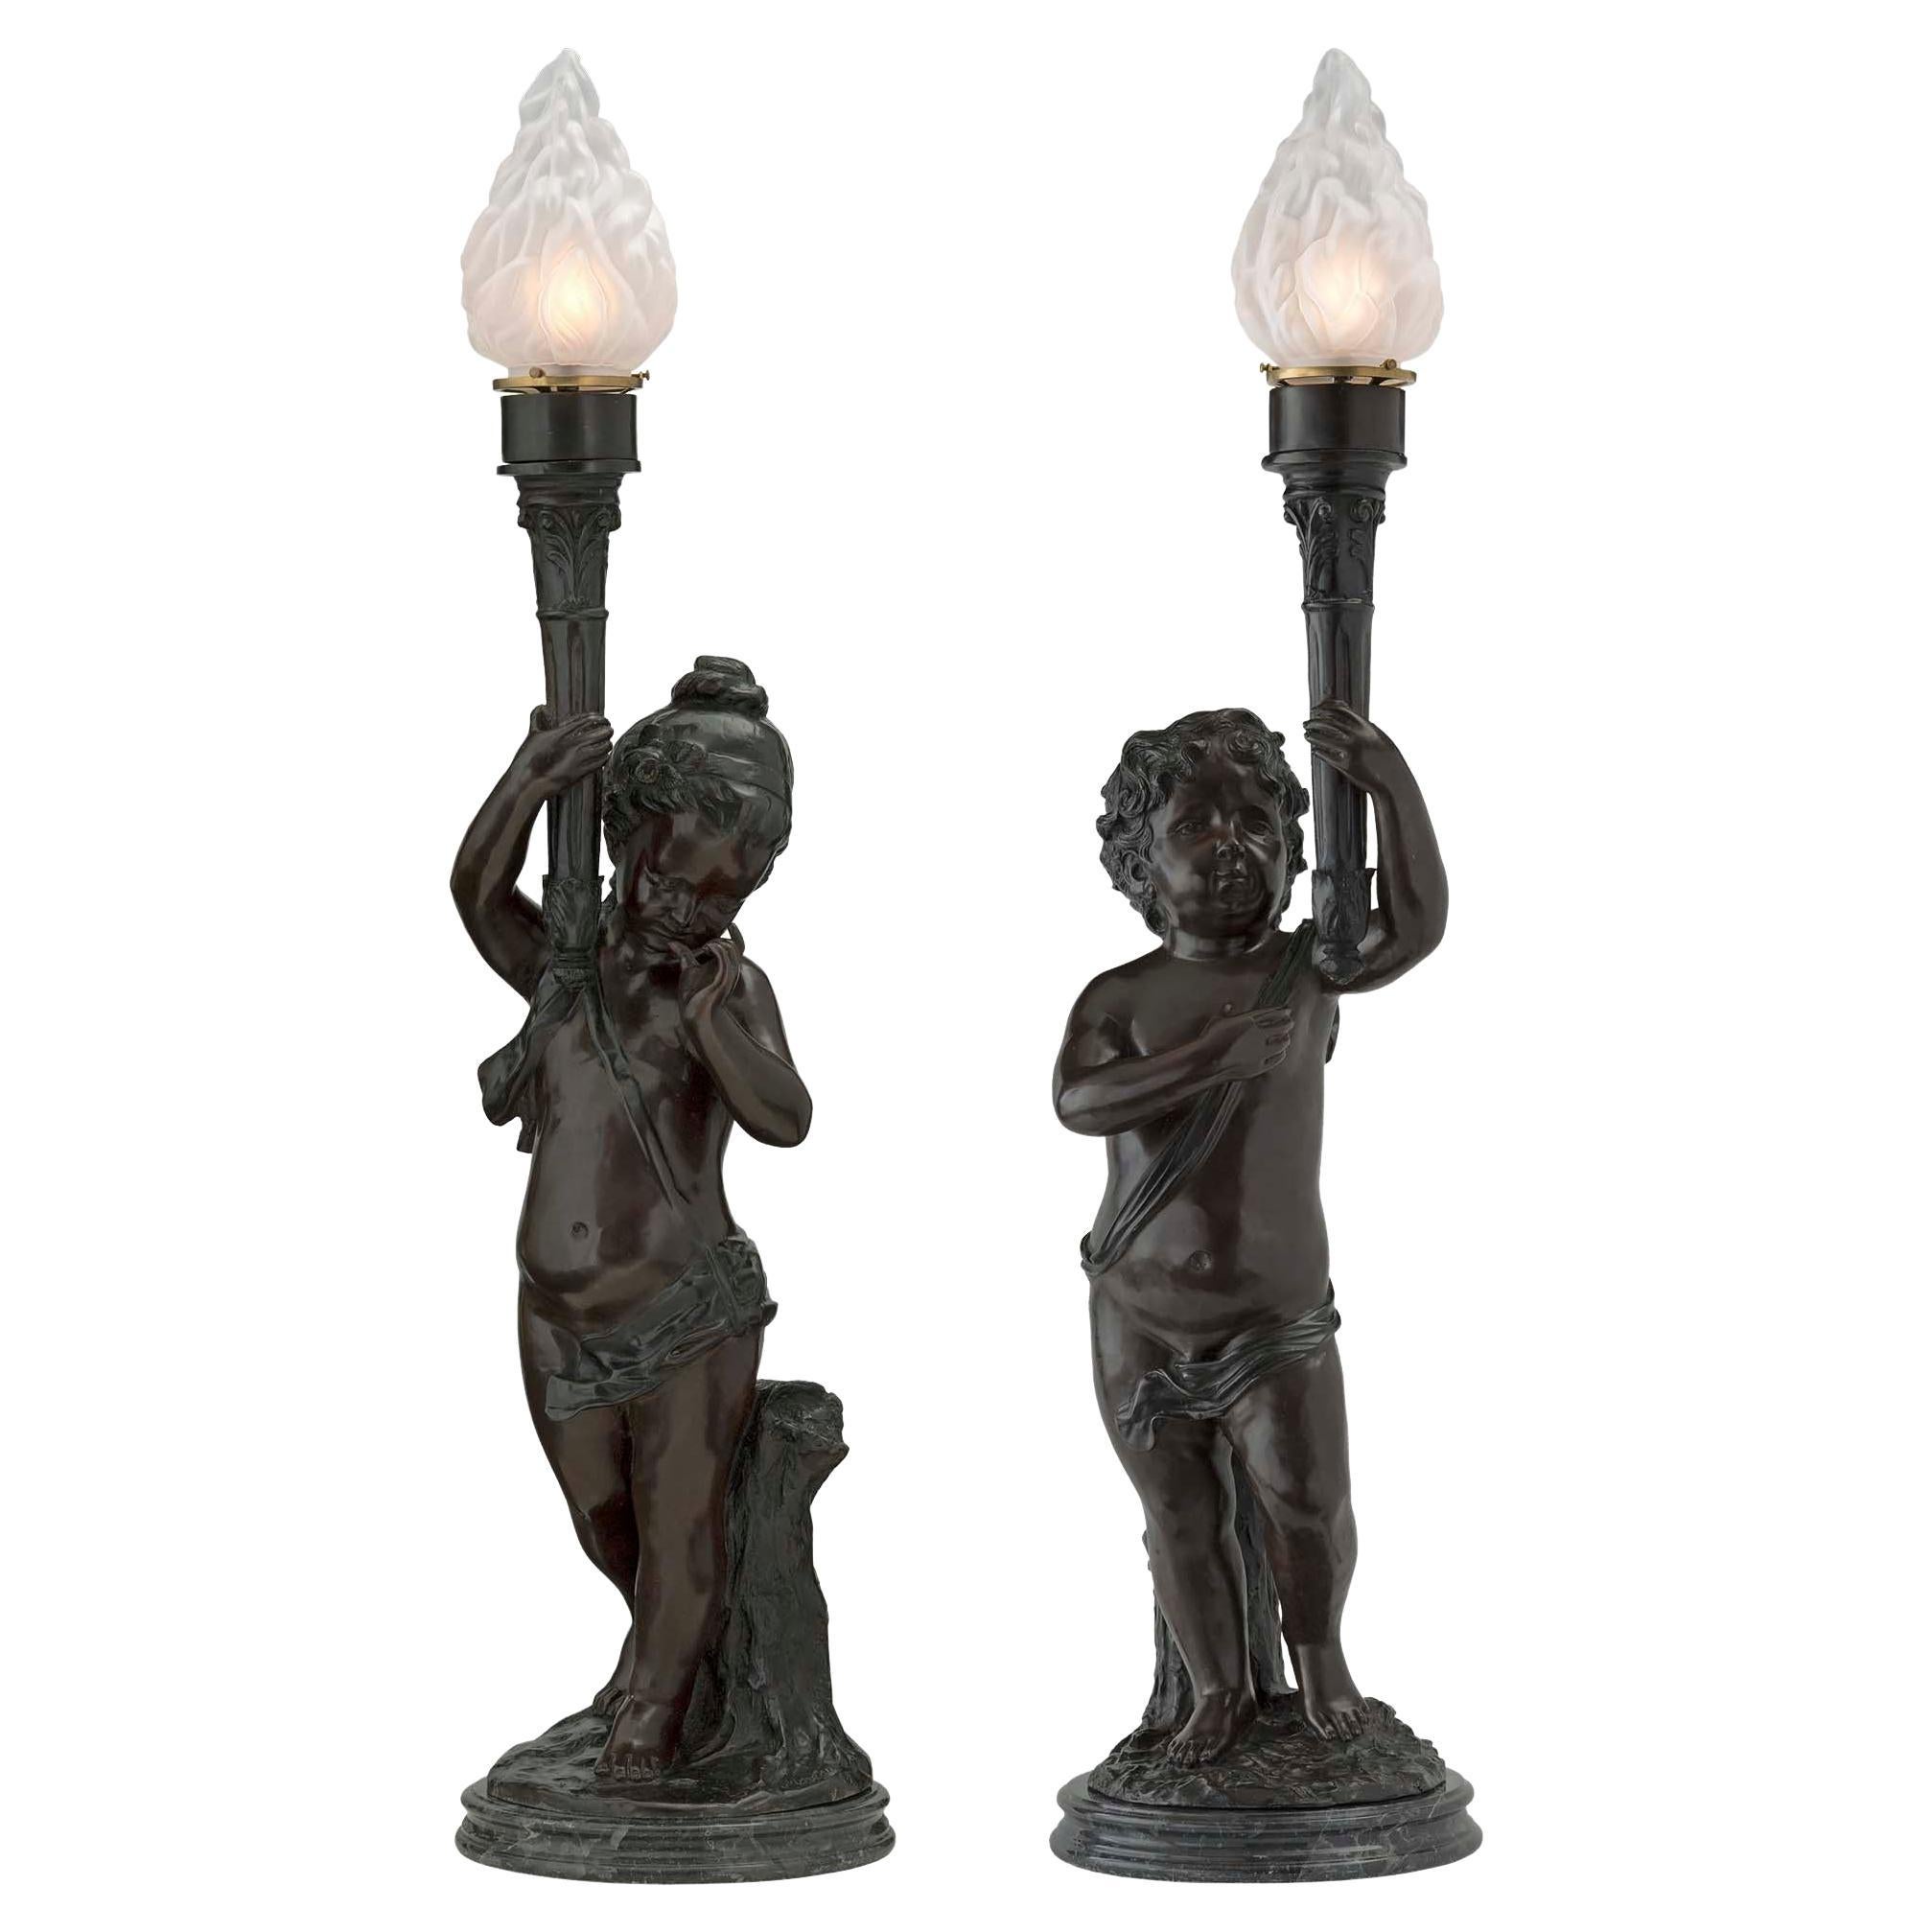 French Turn of the 20th Century Bronze Statues Mounted into Lamps, Signed Moreau